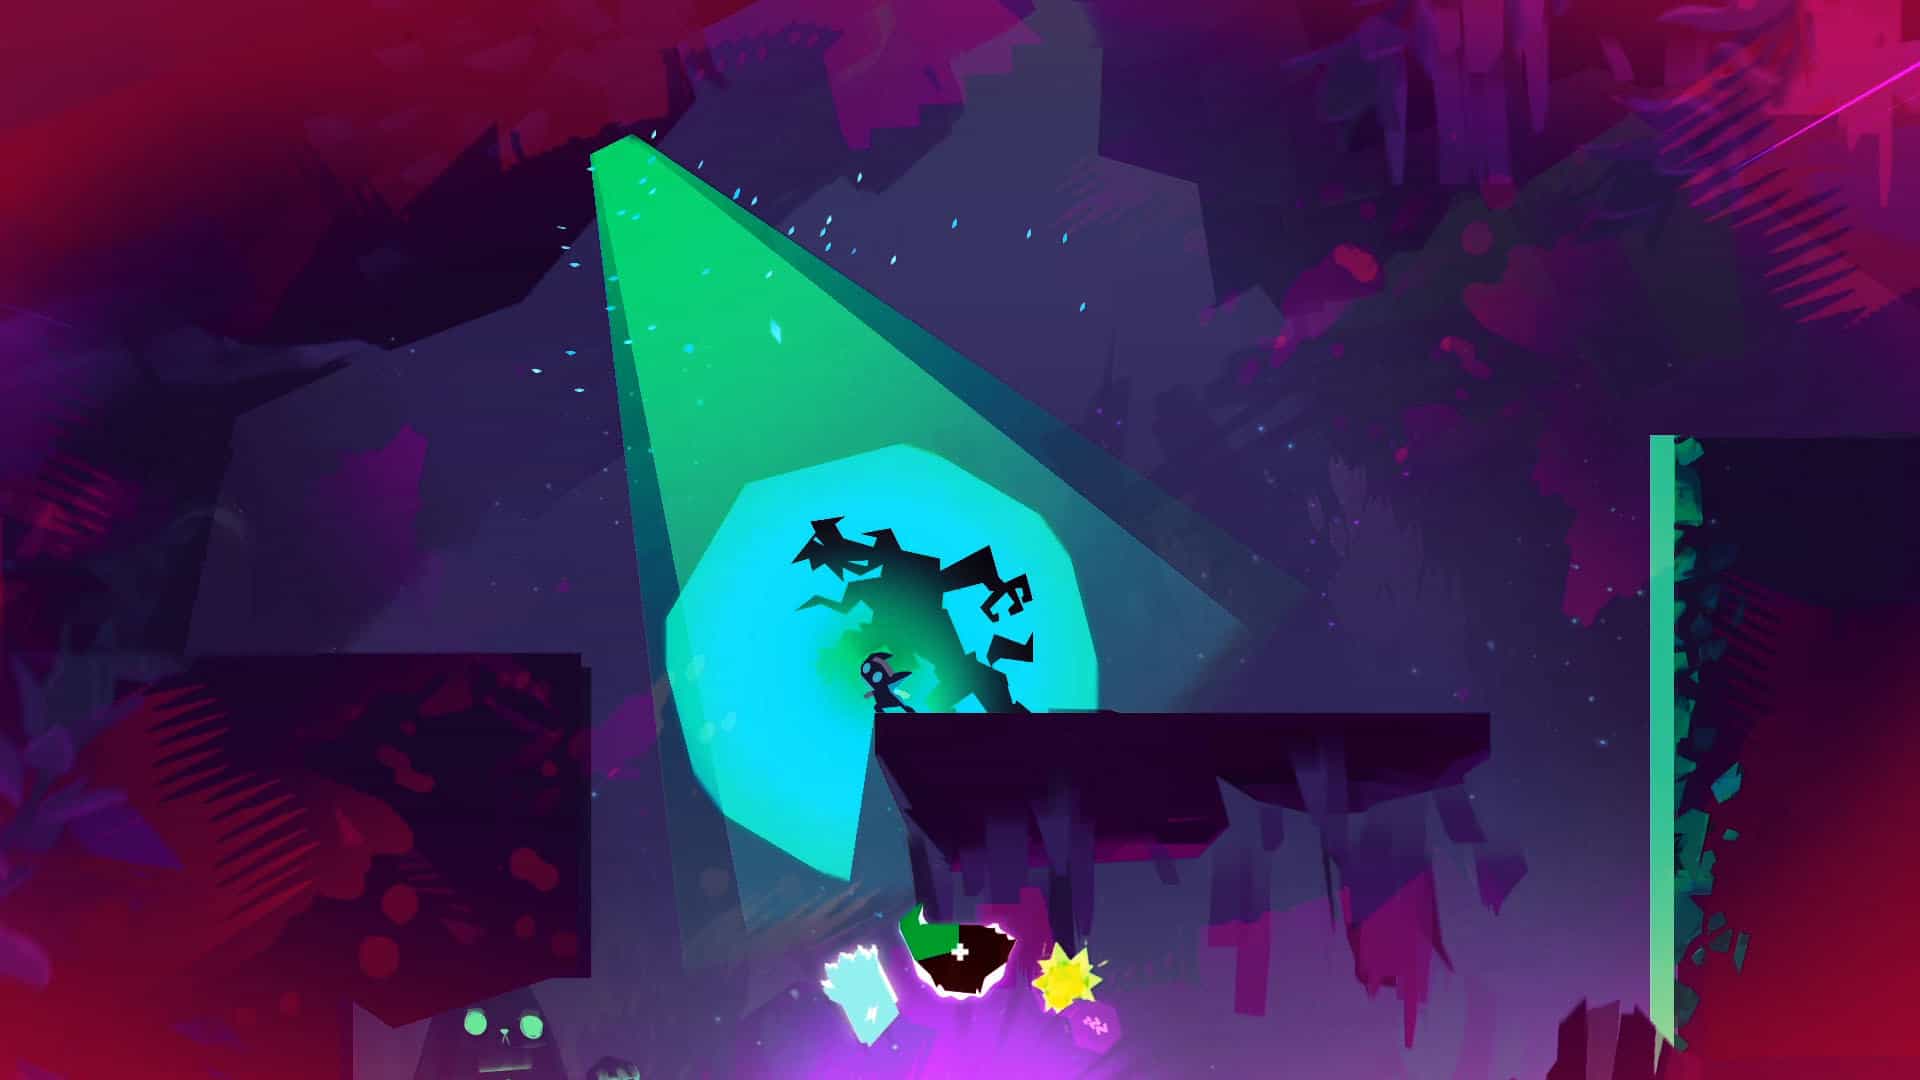 Cosmic is an 2D action platformer starring you and your shadow, coming 2022